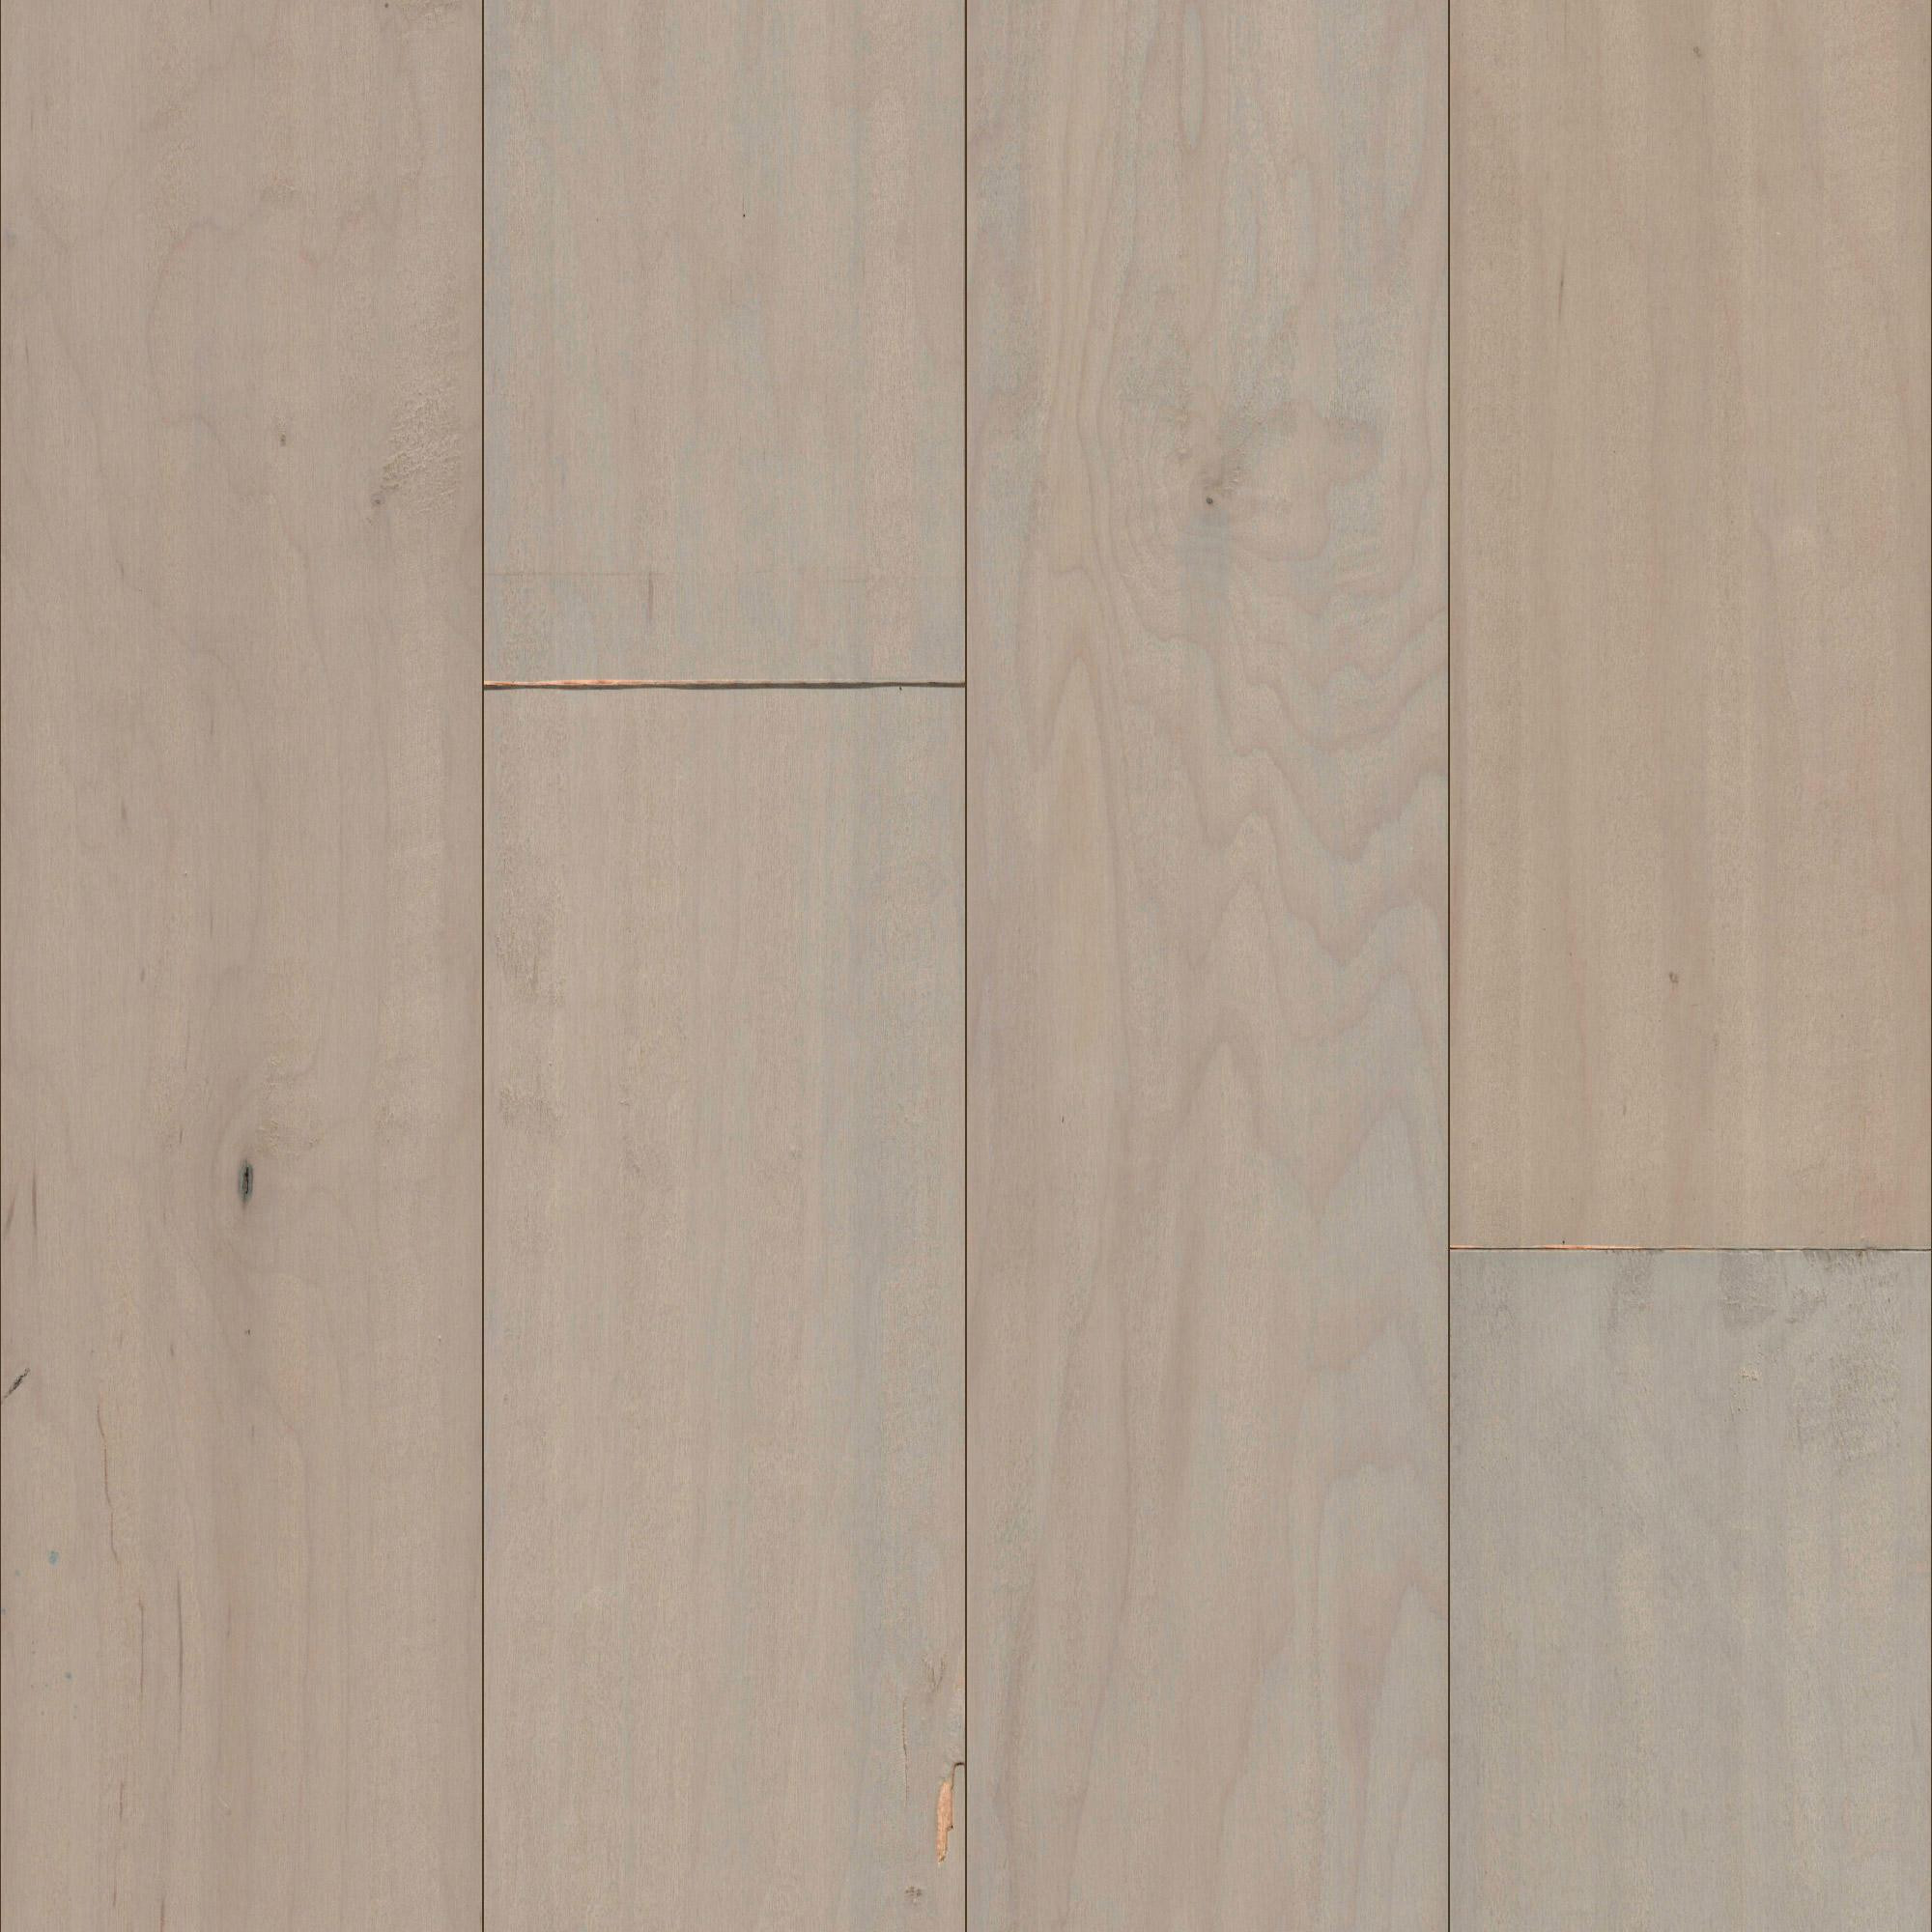 2 1 4 maple hardwood flooring of mullican lincolnshire sculpted maple frost 5 engineered hardwood within mullican lincolnshire sculpted maple frost 5 engineered hardwood flooring